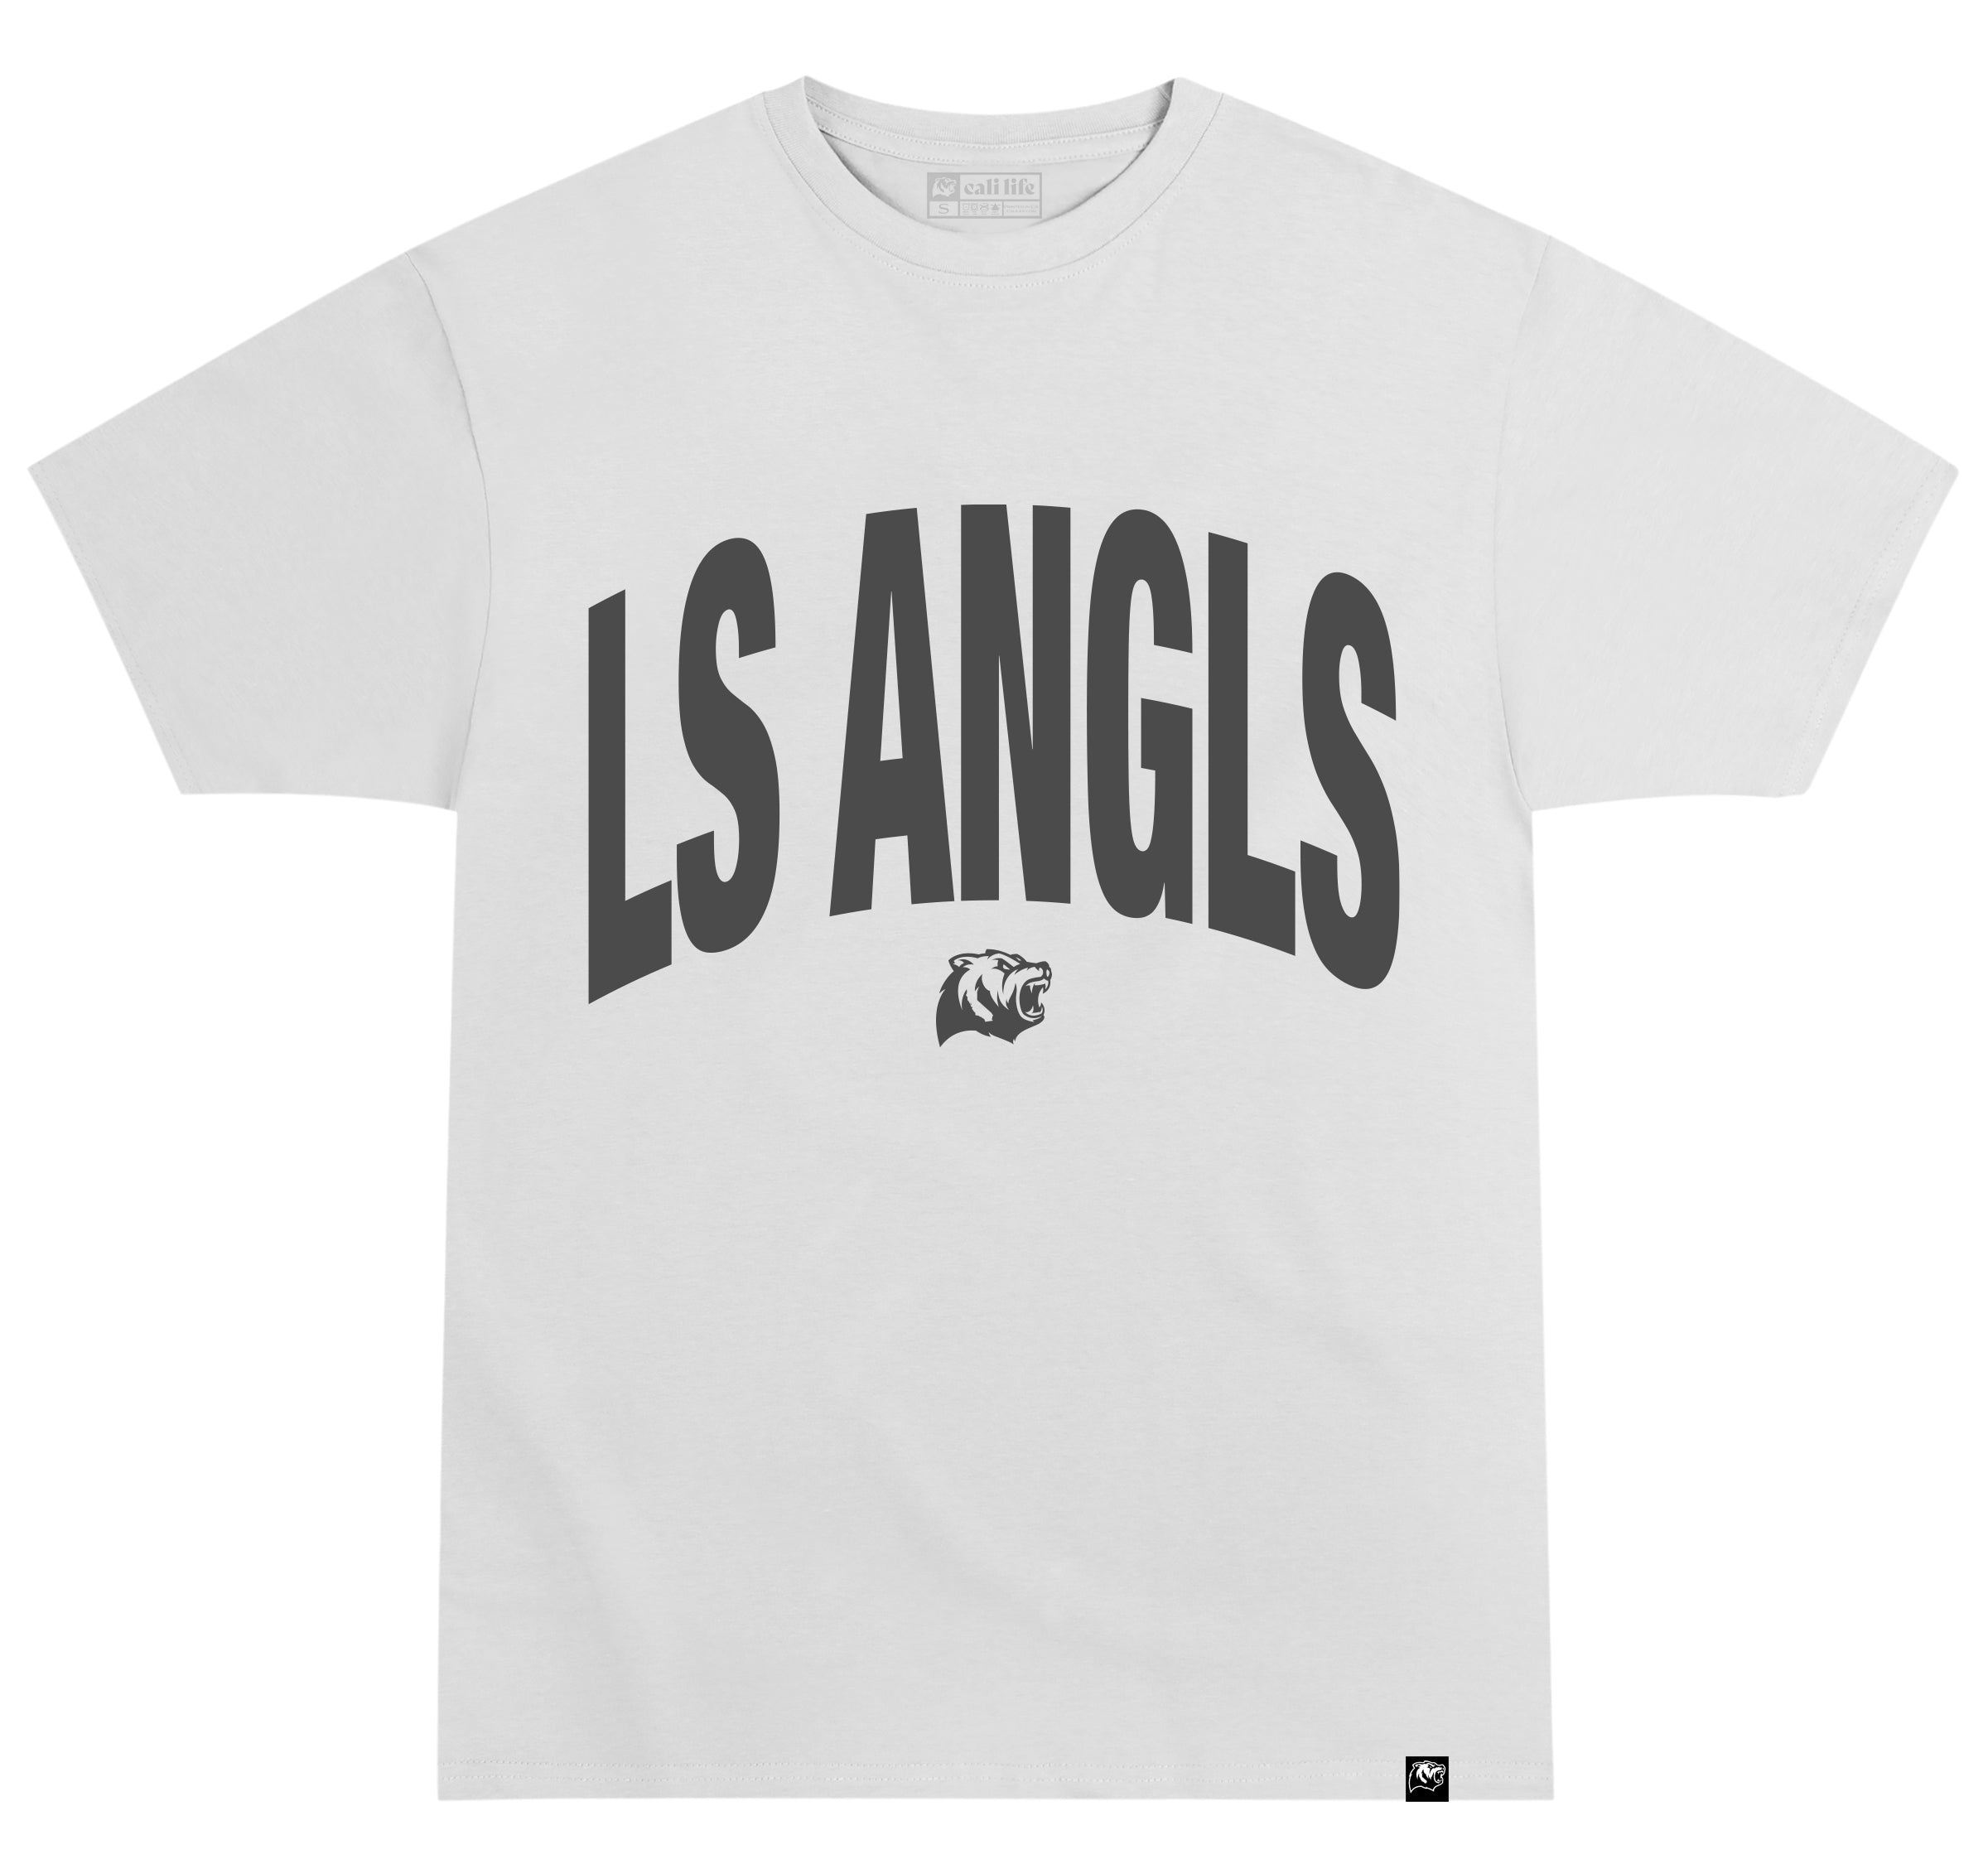 L.A. City Classic One Color Tee